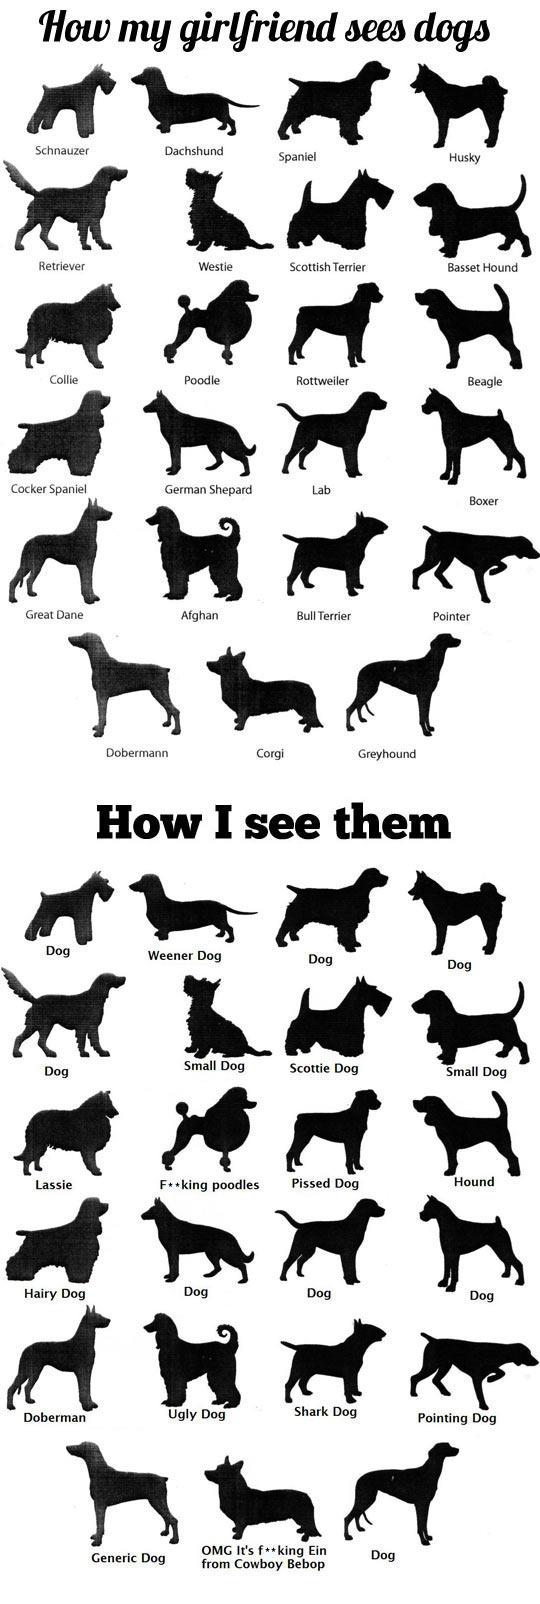 How+I+see+dogs+vs+how+my+girlfriend+sees+dogs